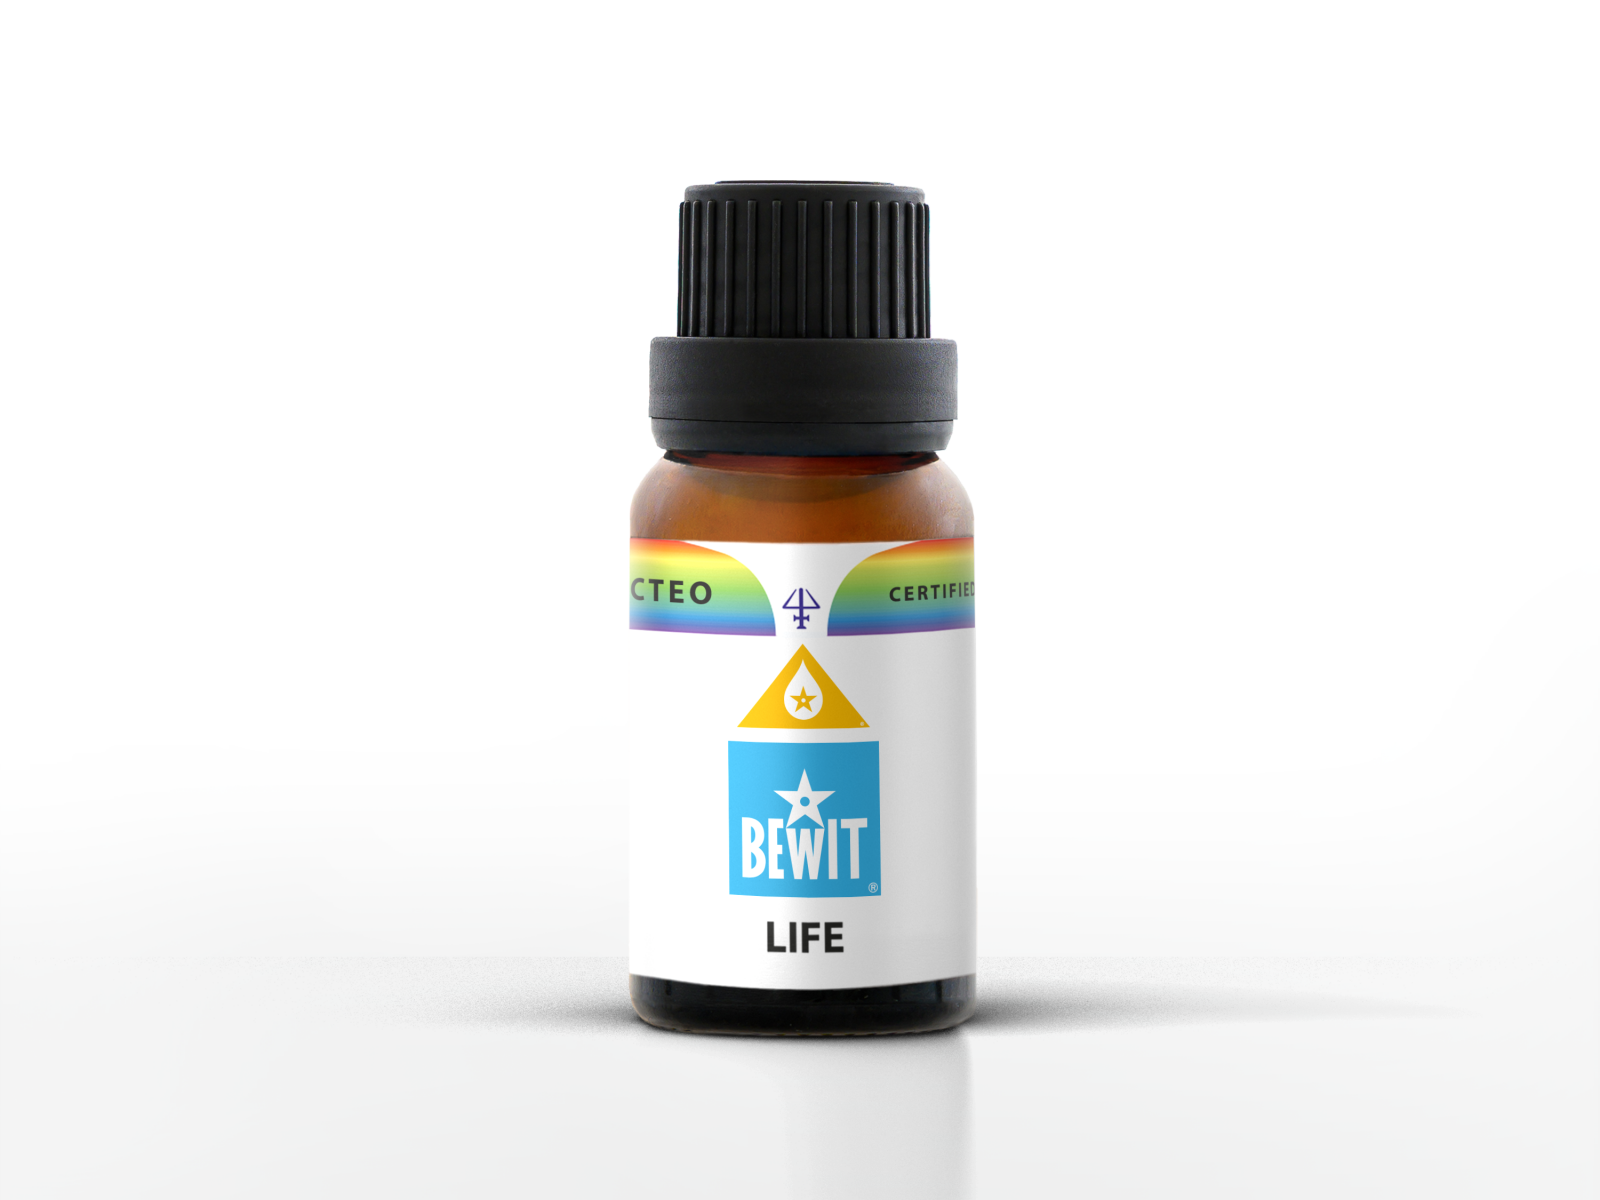 BEWIT LIFE - Blend of essential oils